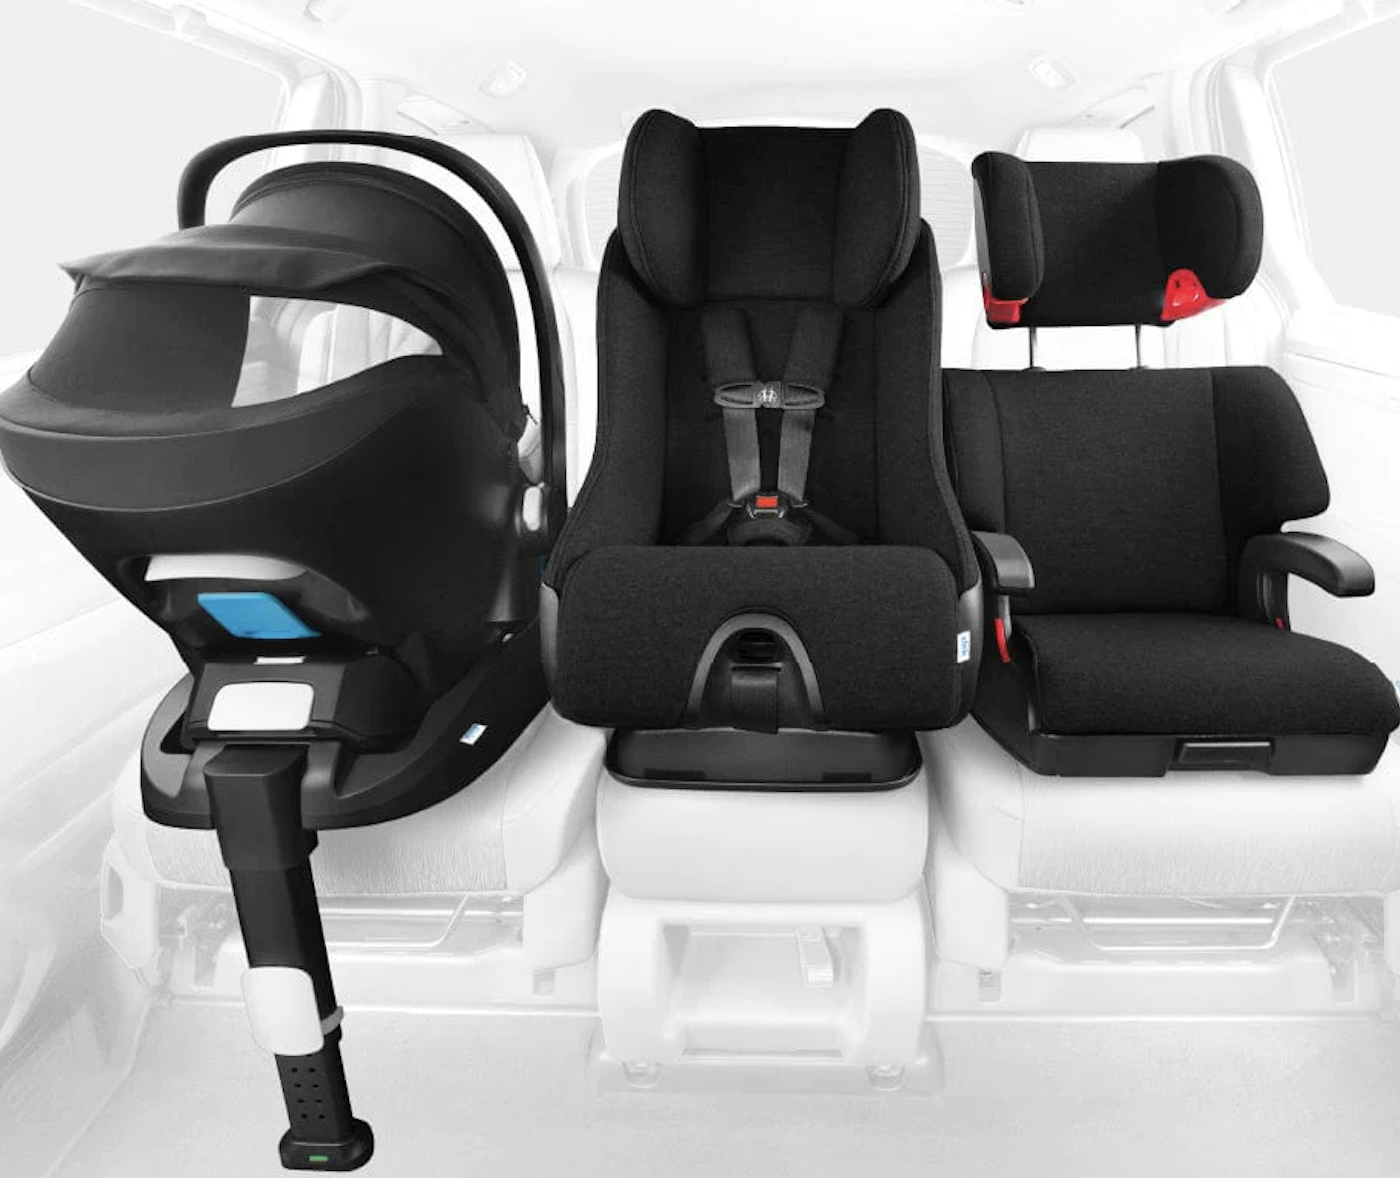 CelloMom on Cars: Narrow Booster Seat